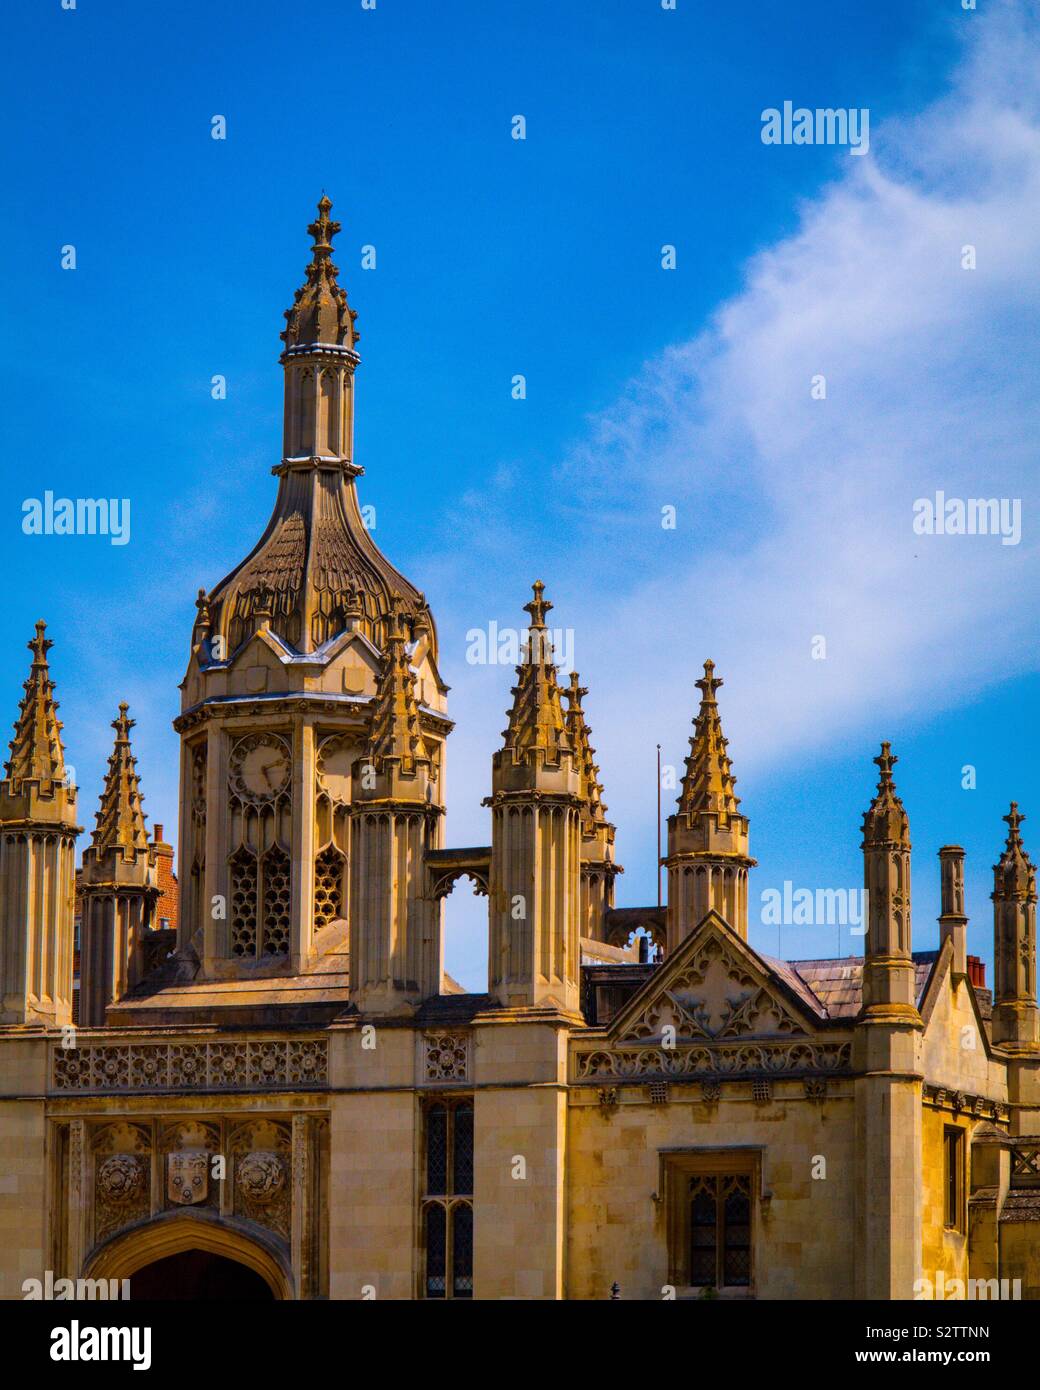 View over the roofline of King’s College at Cambridge University England UK Stock Photo